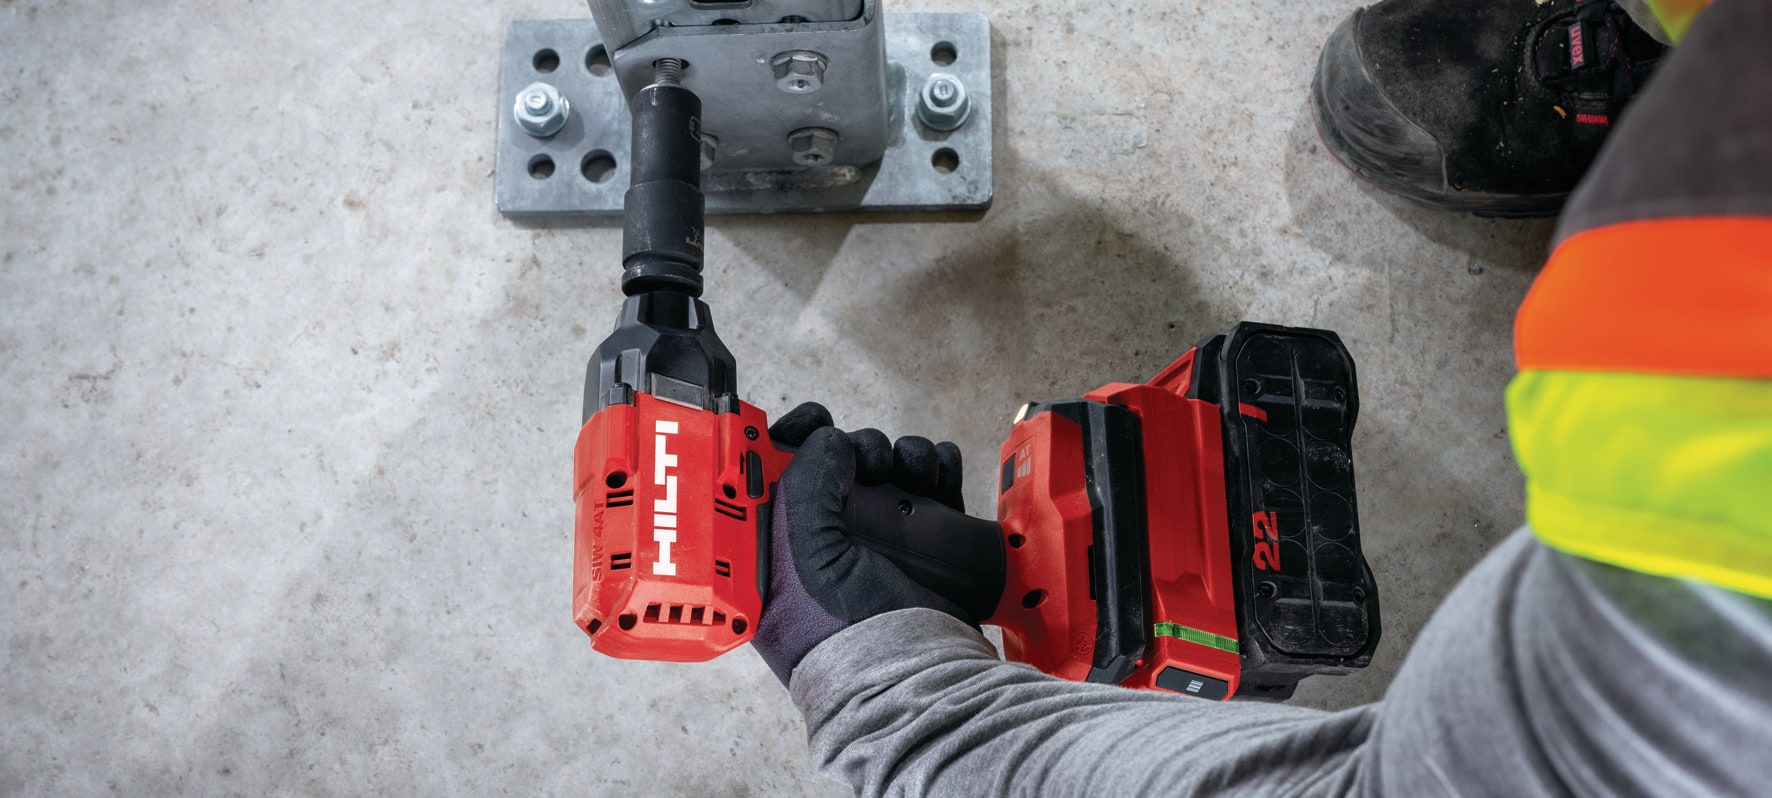 SIW 4AT-22 ½” Cordless impact wrench - Cordless Impact Wrenches - Hilti USA